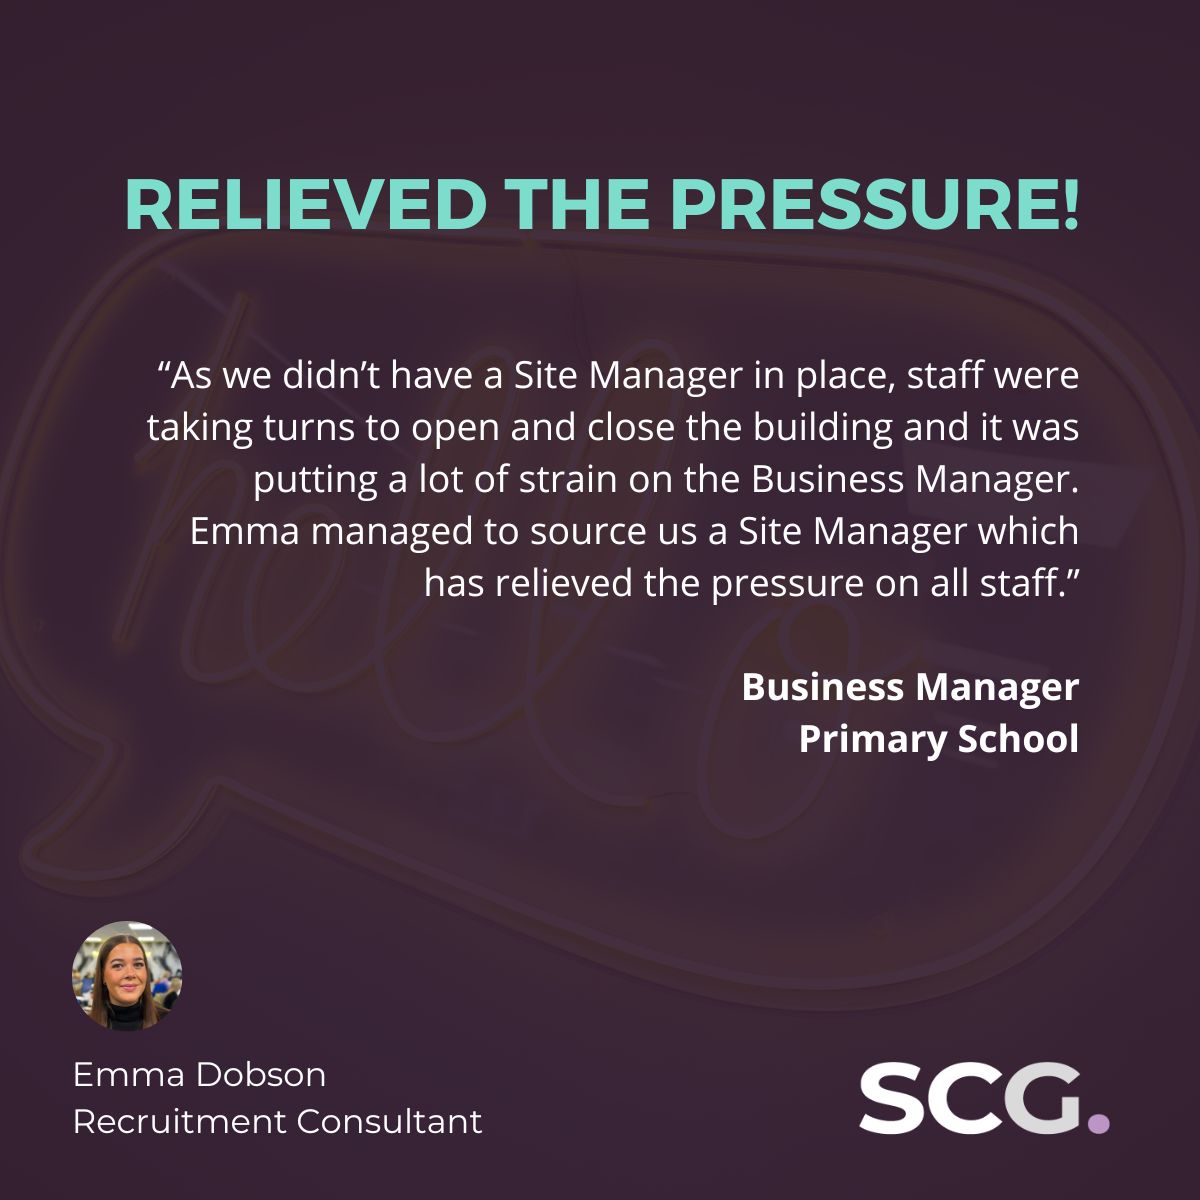 Well done to Recruitment Consultant, Emma Dobson, for this amazing client feedback! Looking for support with recruiting school facilities staff? Get in touch with Emma today - 📞 01772 954200 📩 ed@spencerclarkegroup.co.uk #testimonialthursday #clientfeedback #schoolfacilities